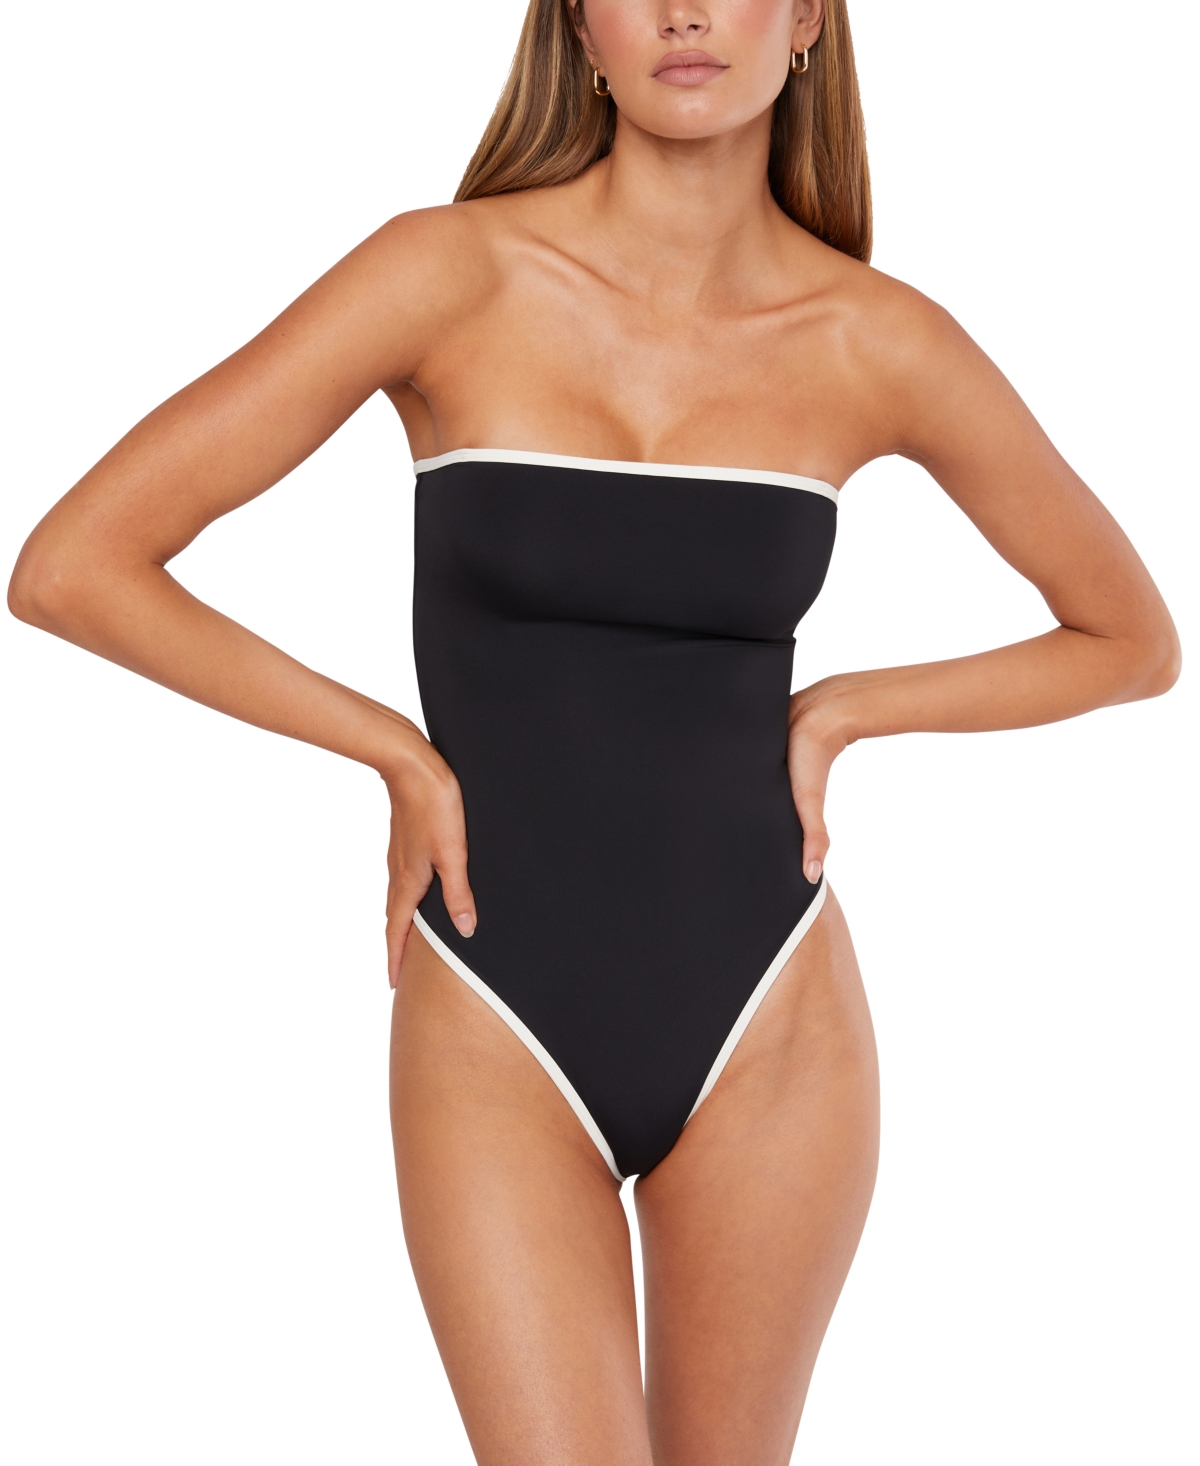 Weworewhat Women's Strapless One Piece Swimsuit In Black,off White